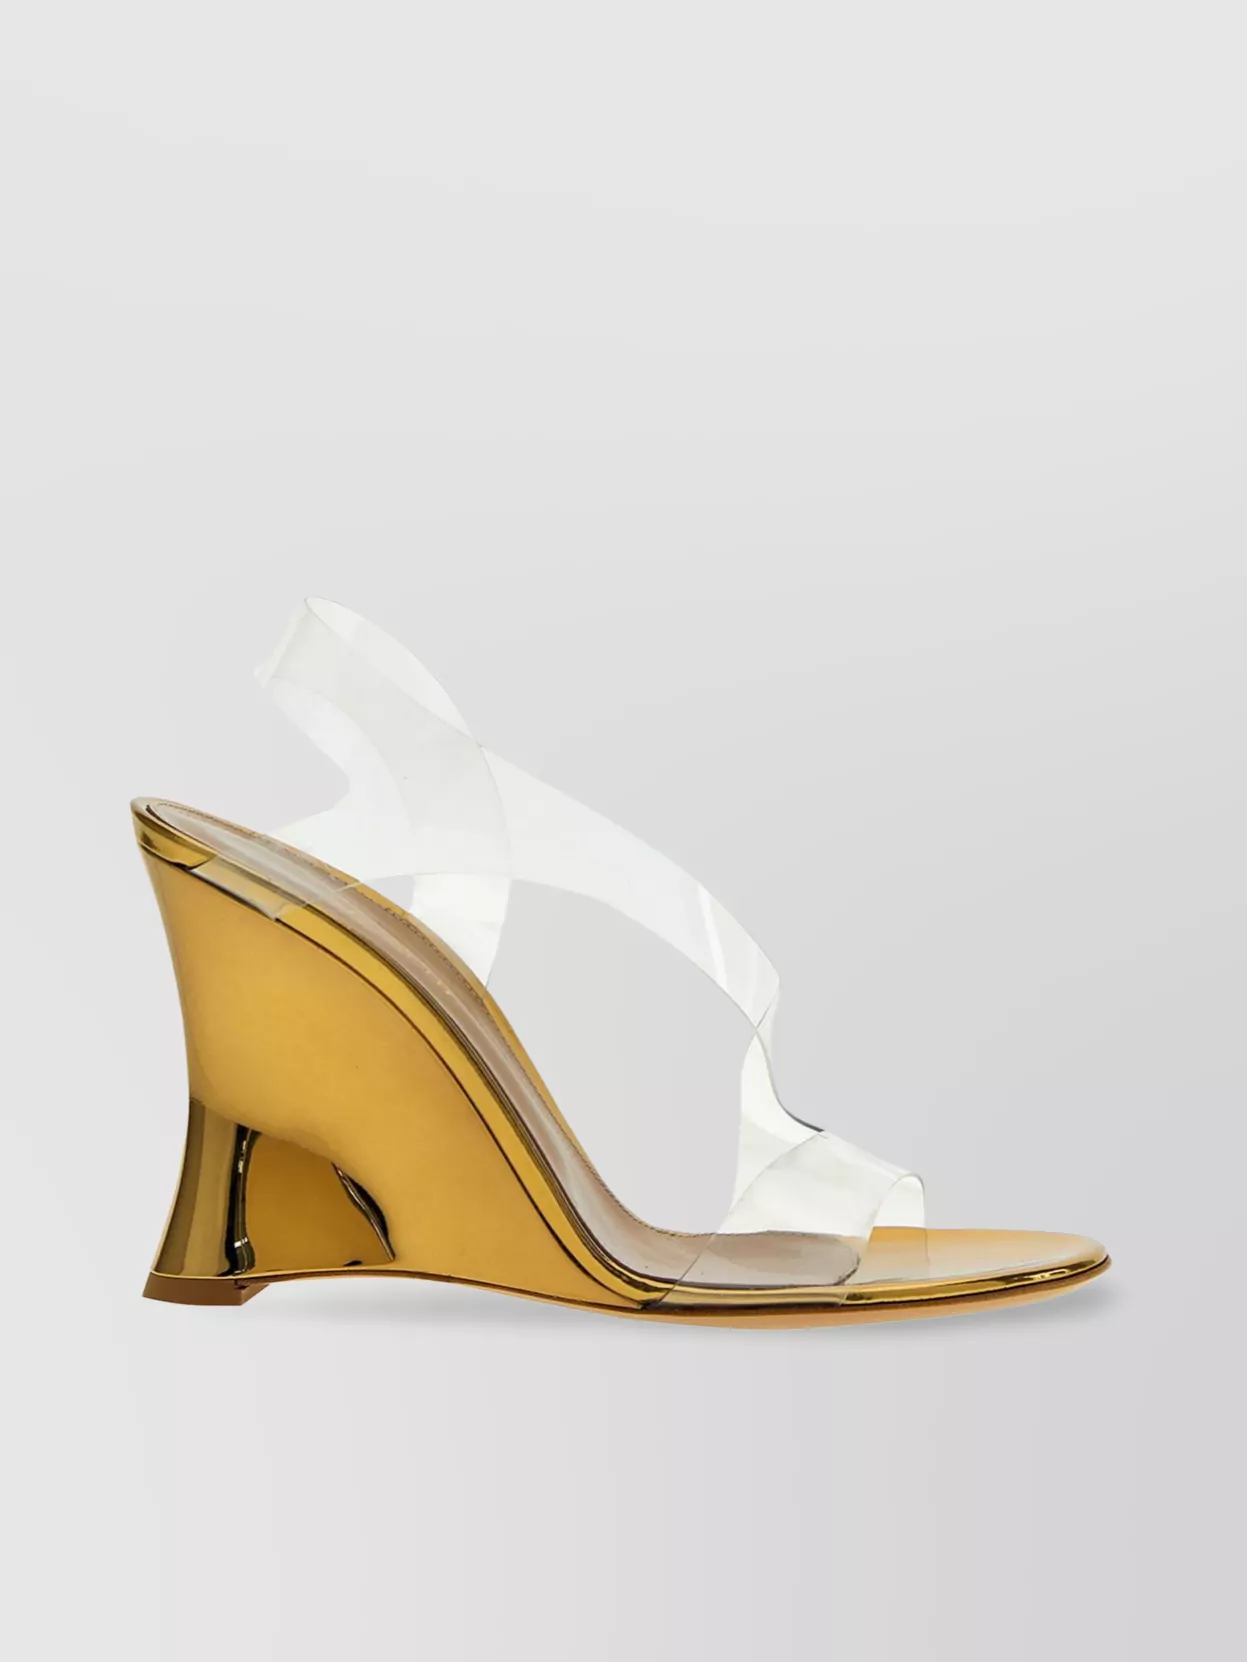 Gianvito Rossi Transparent Wedge Heel Sandals With Gold-tone Accents